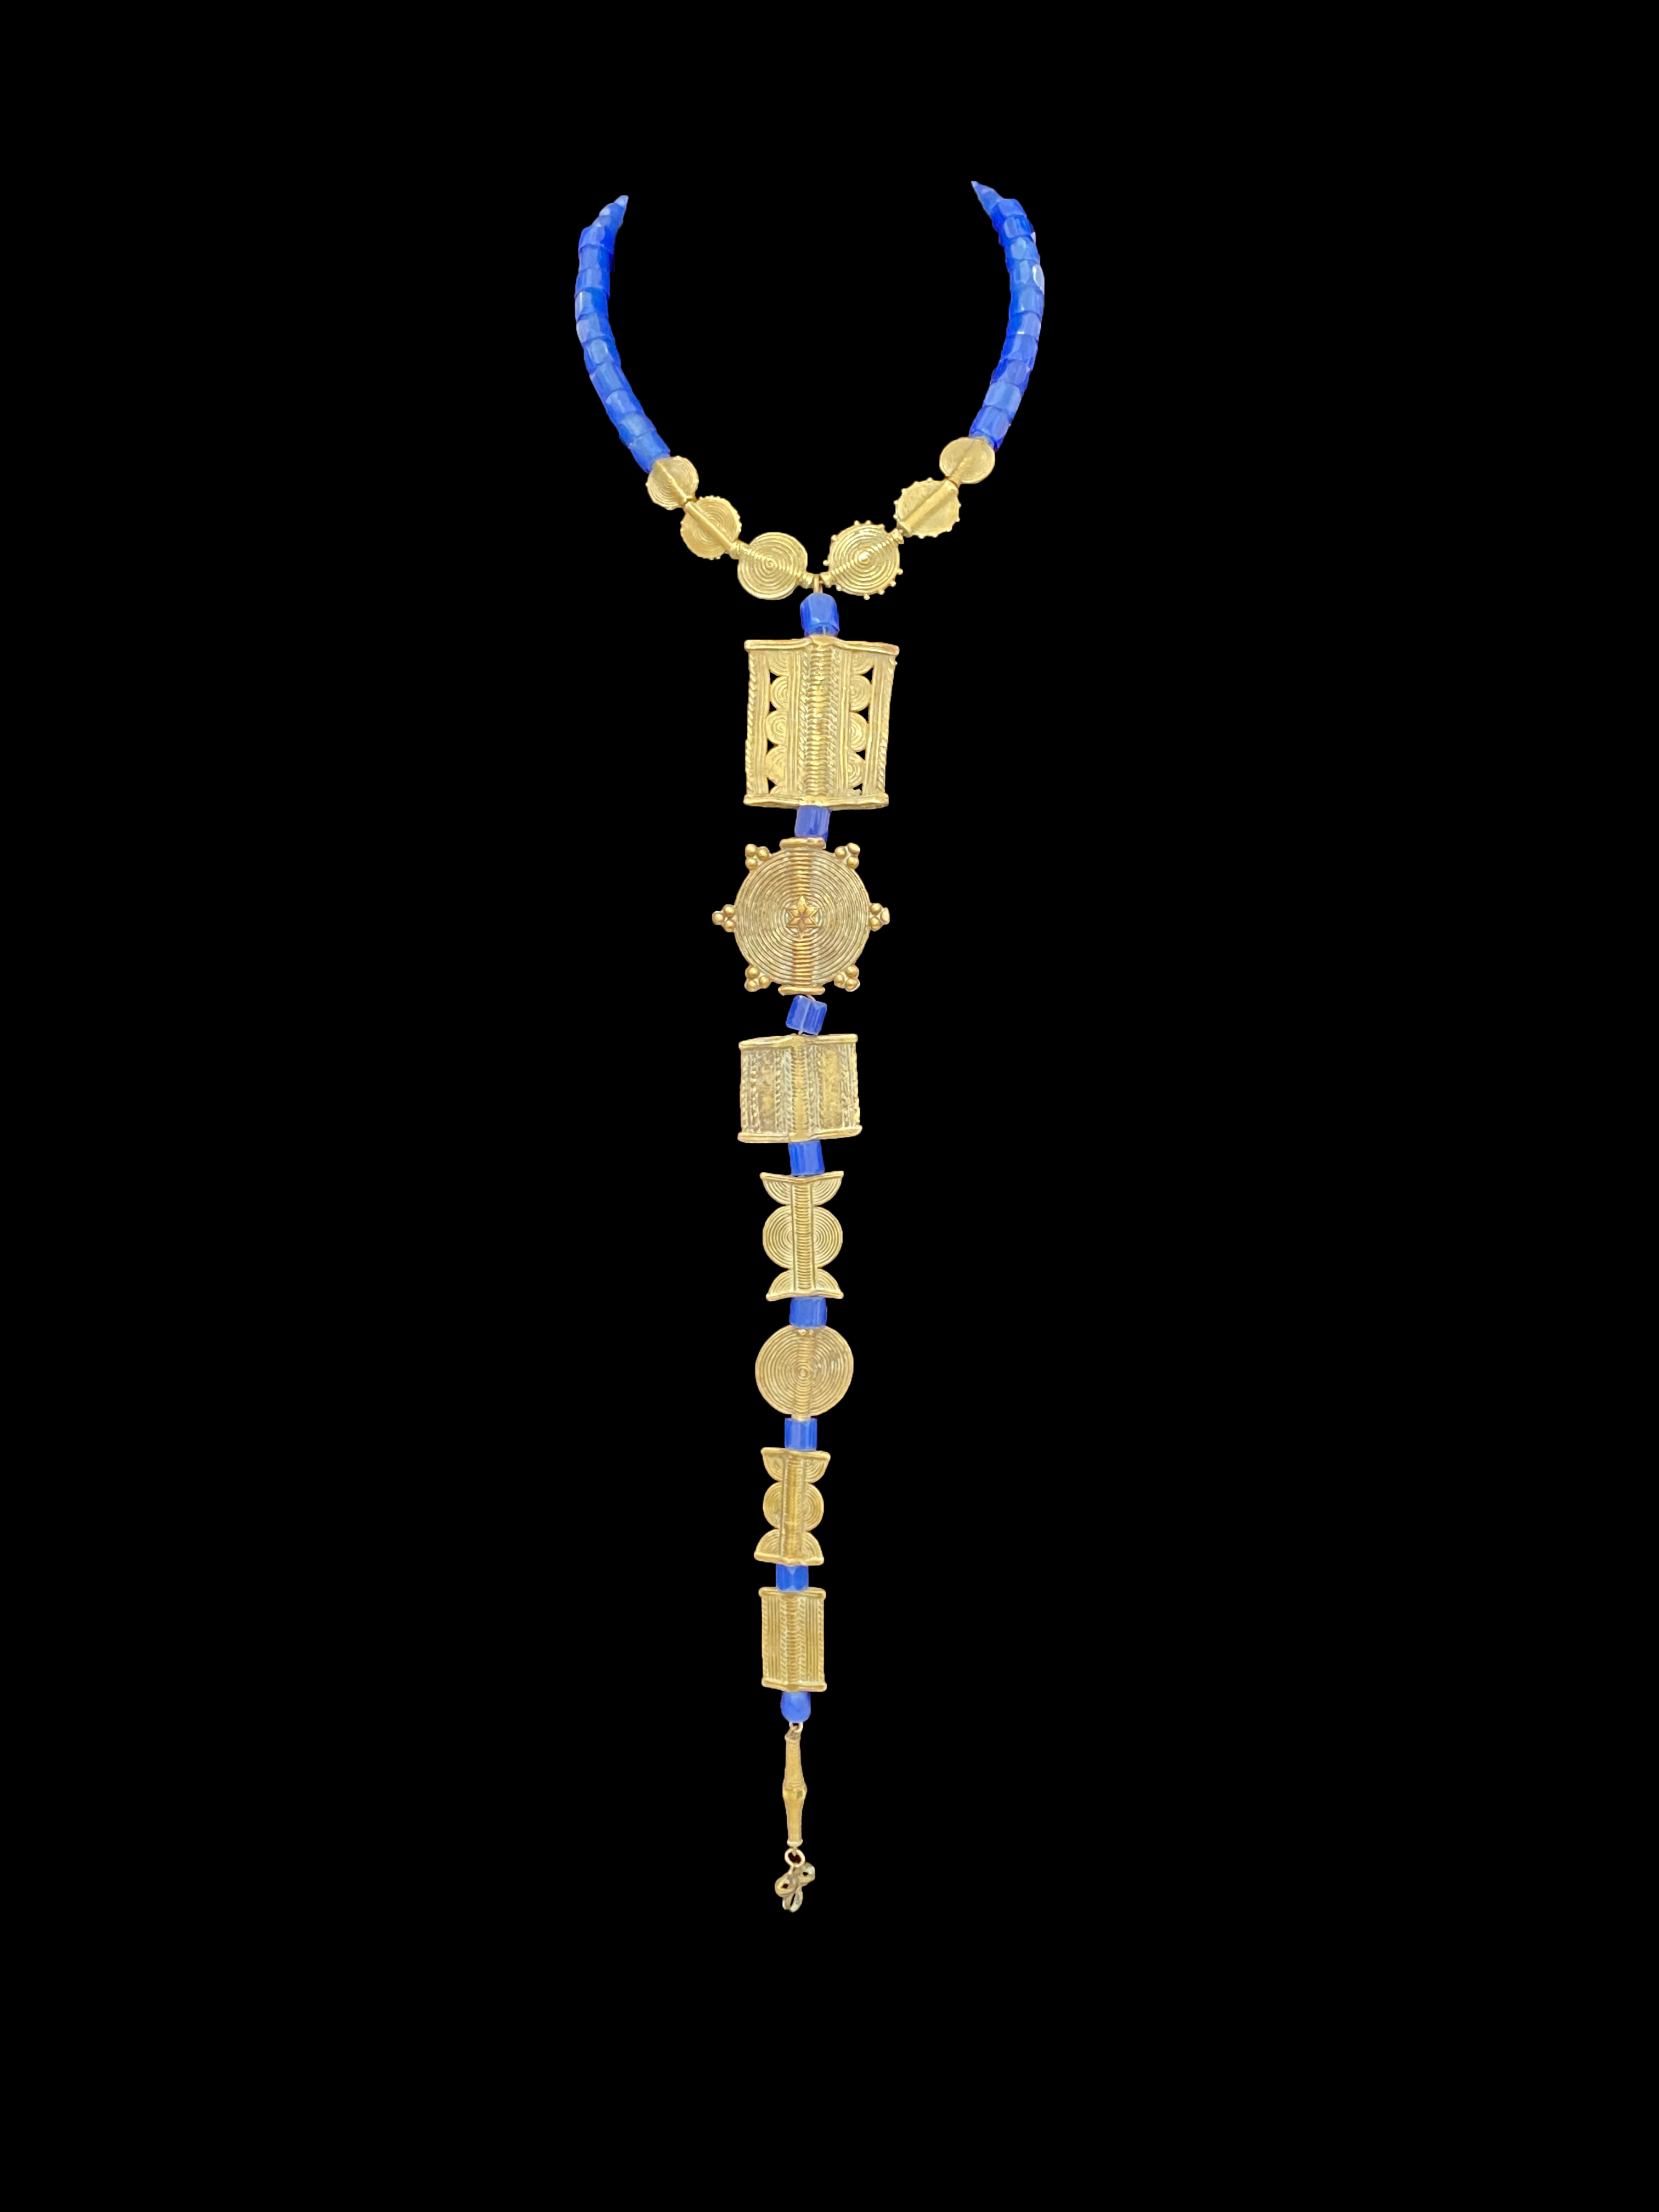 Necklace made from Old Rare Russian/Bohemian Blue African Trade Beads with Brass Beads